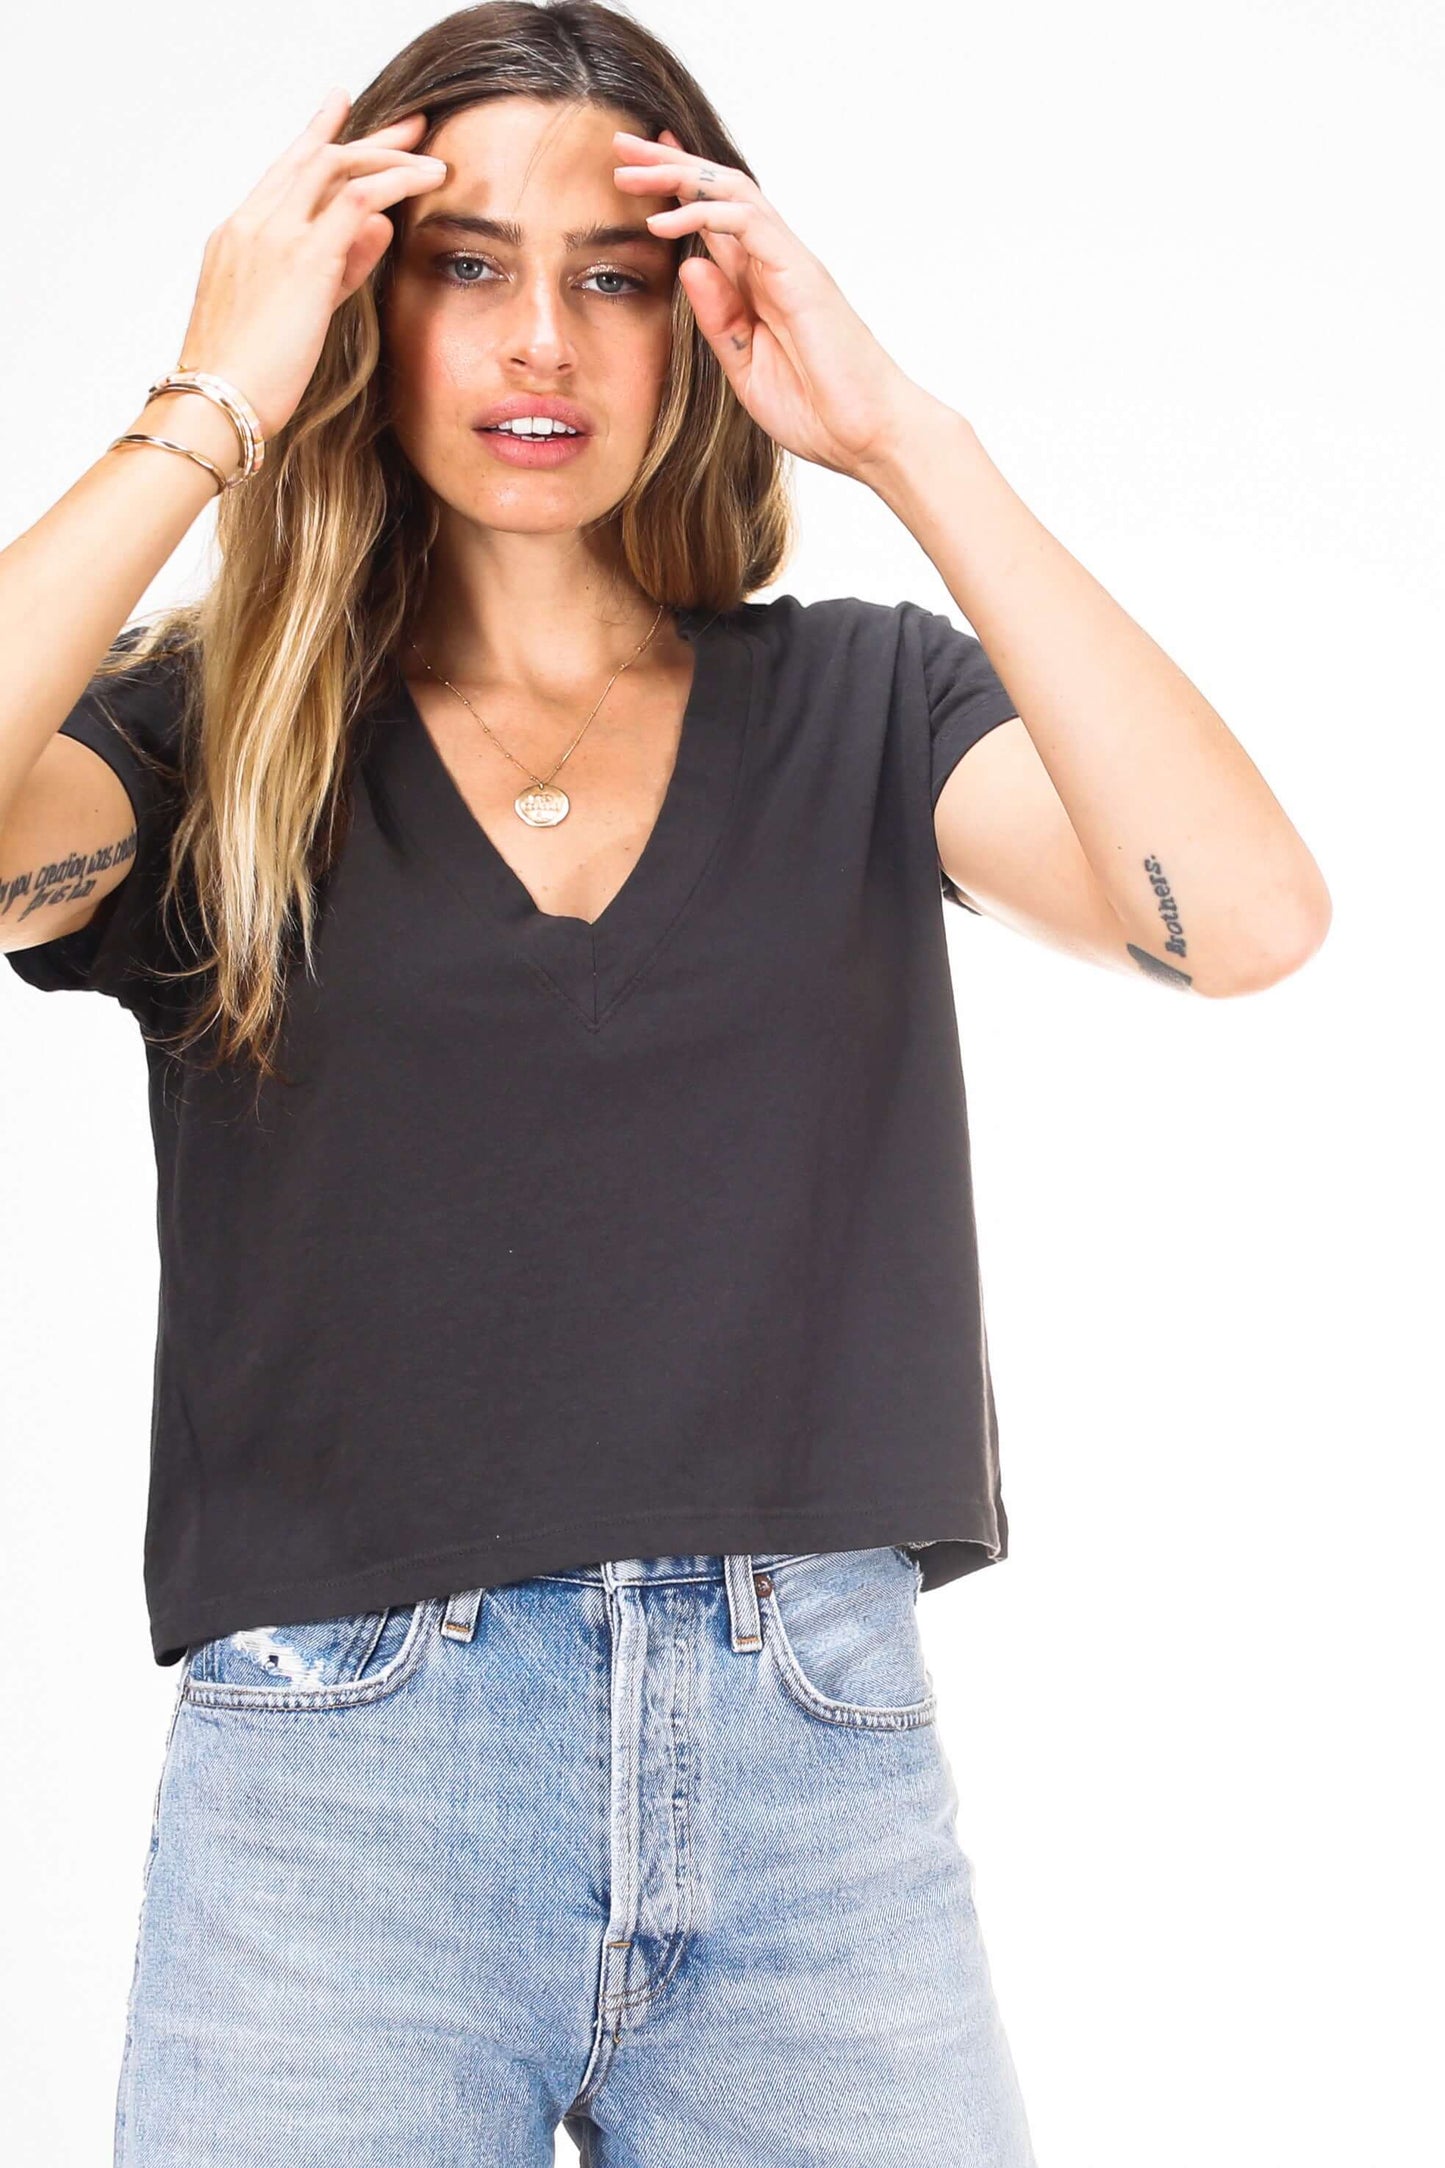 Alanis Recycled Cotton V-Neck Tee - Vintage Black